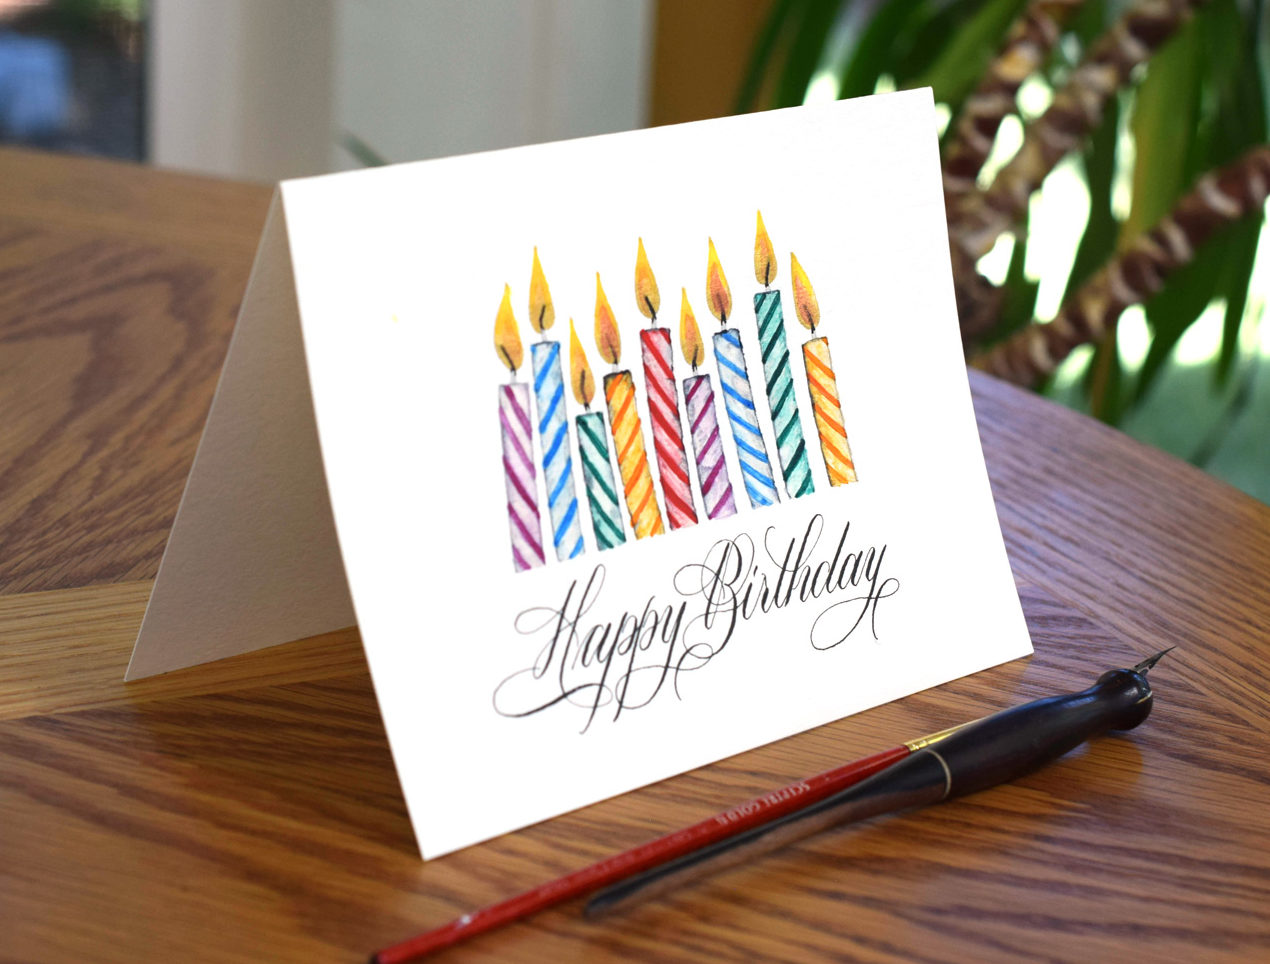 Festive Candles Watercolor Birthday Card Tutorial